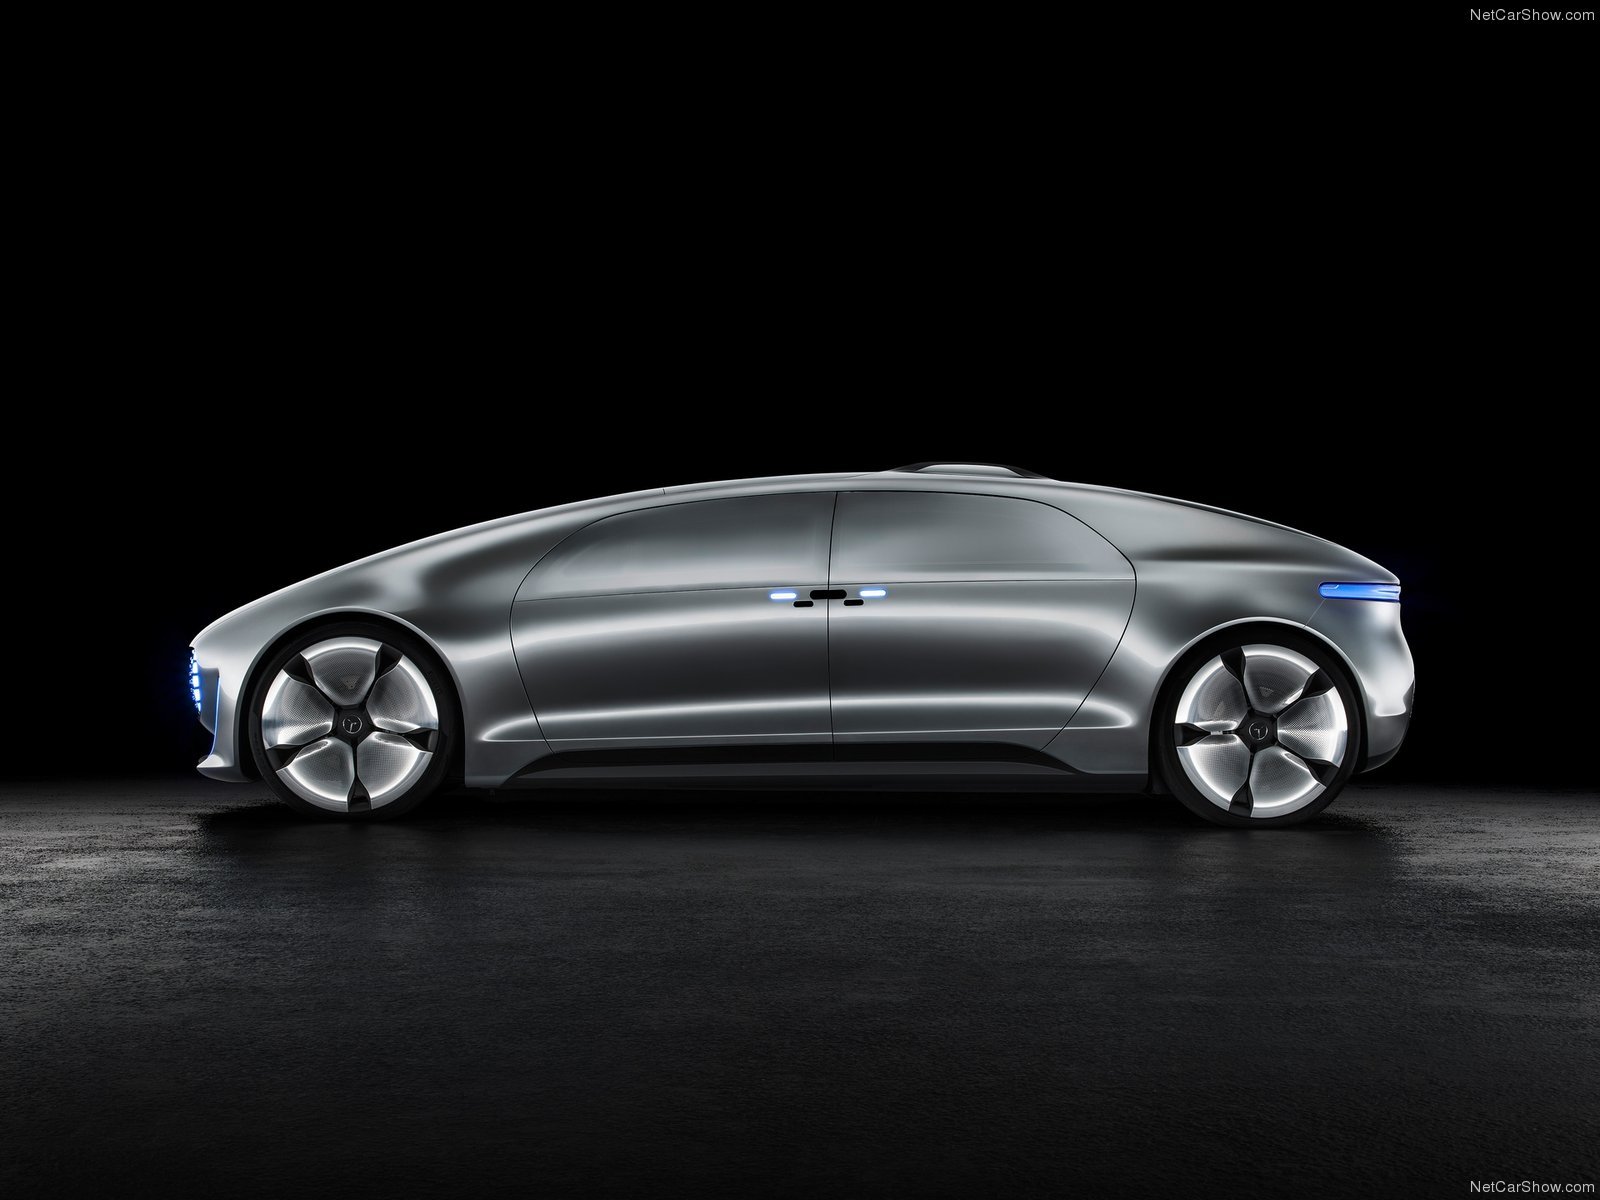 mercedes, Benz, F015, Luxury, In, Motion, Concept, Cars Wallpaper